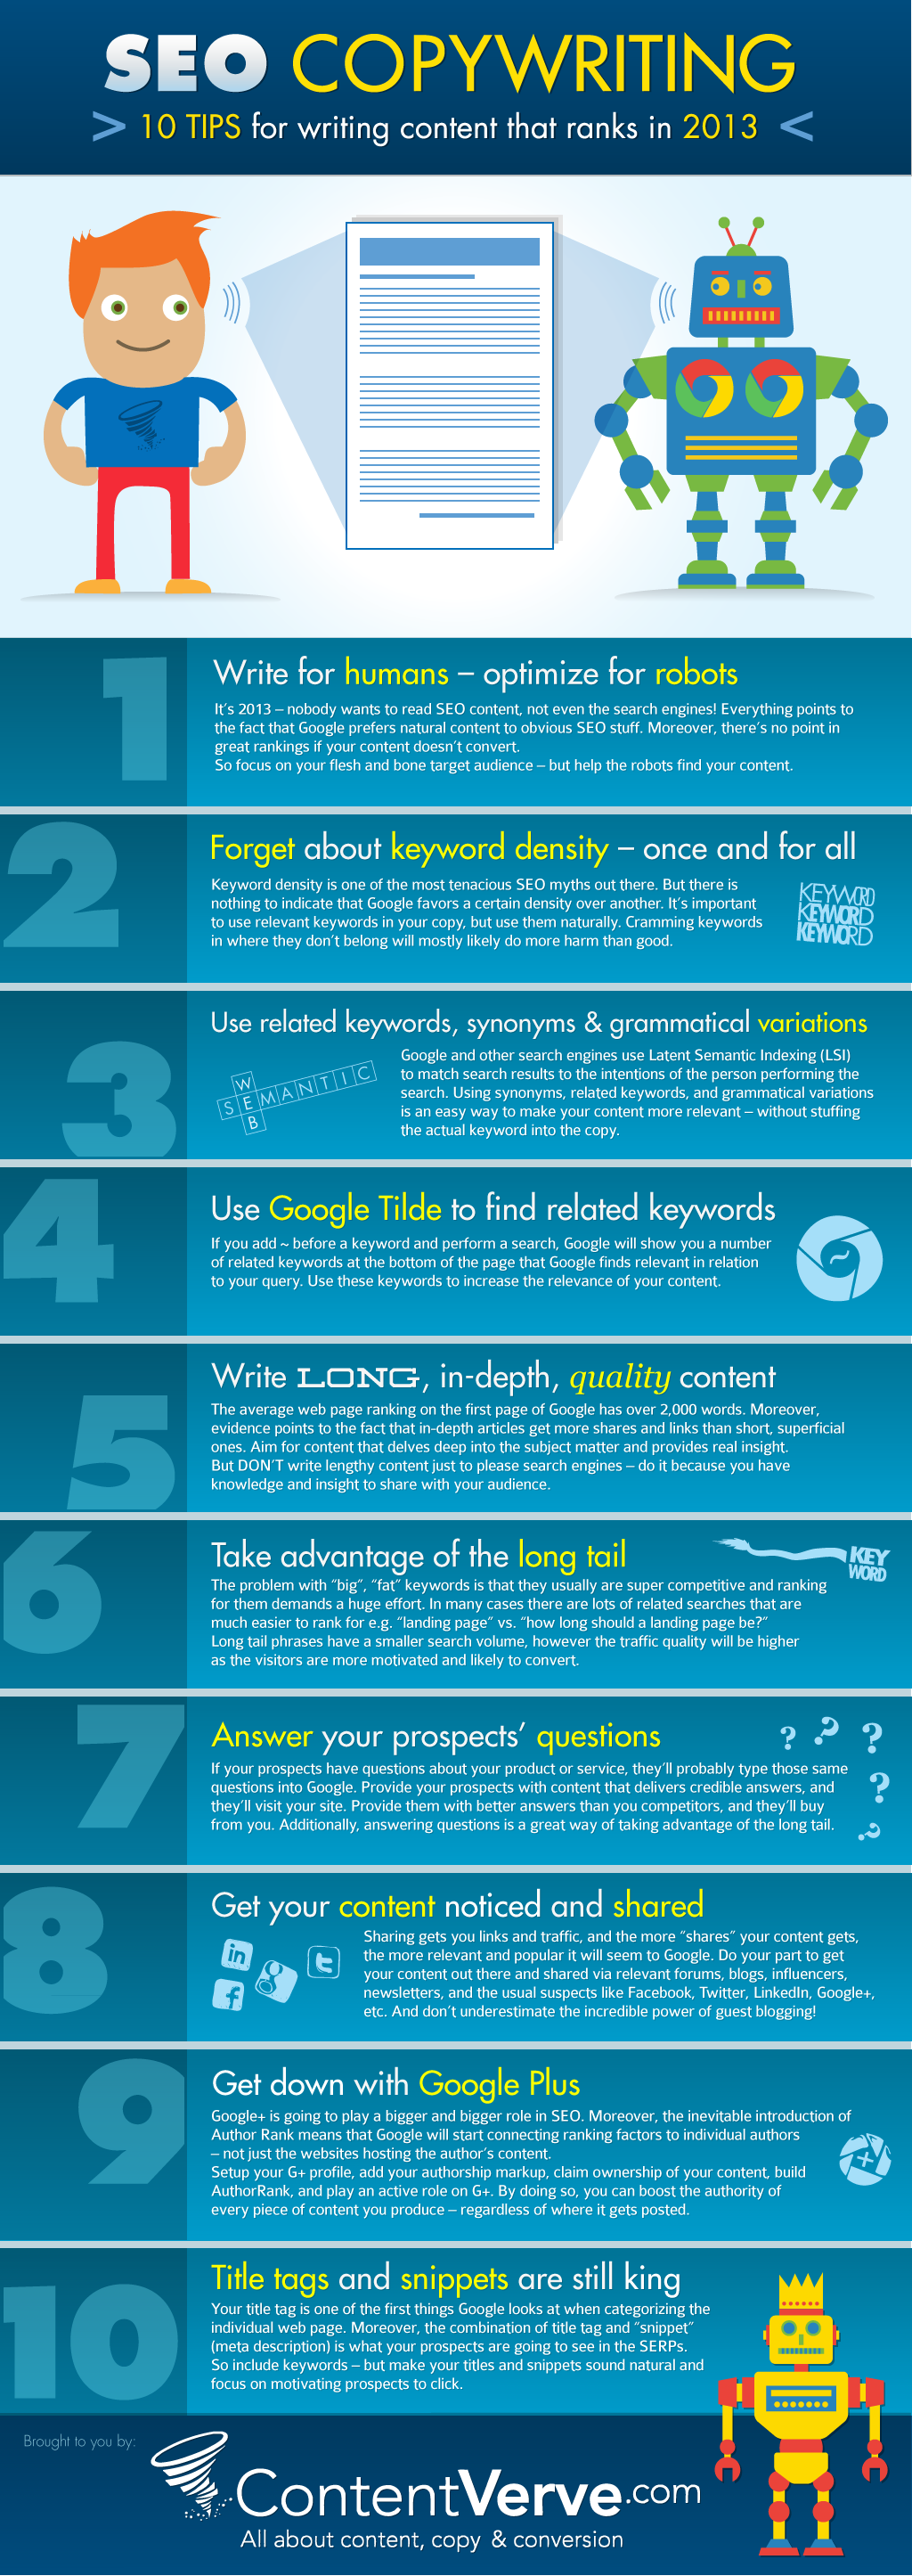 SEO Copywriting – 10 Tips for Writing Content that Ranks in 2013